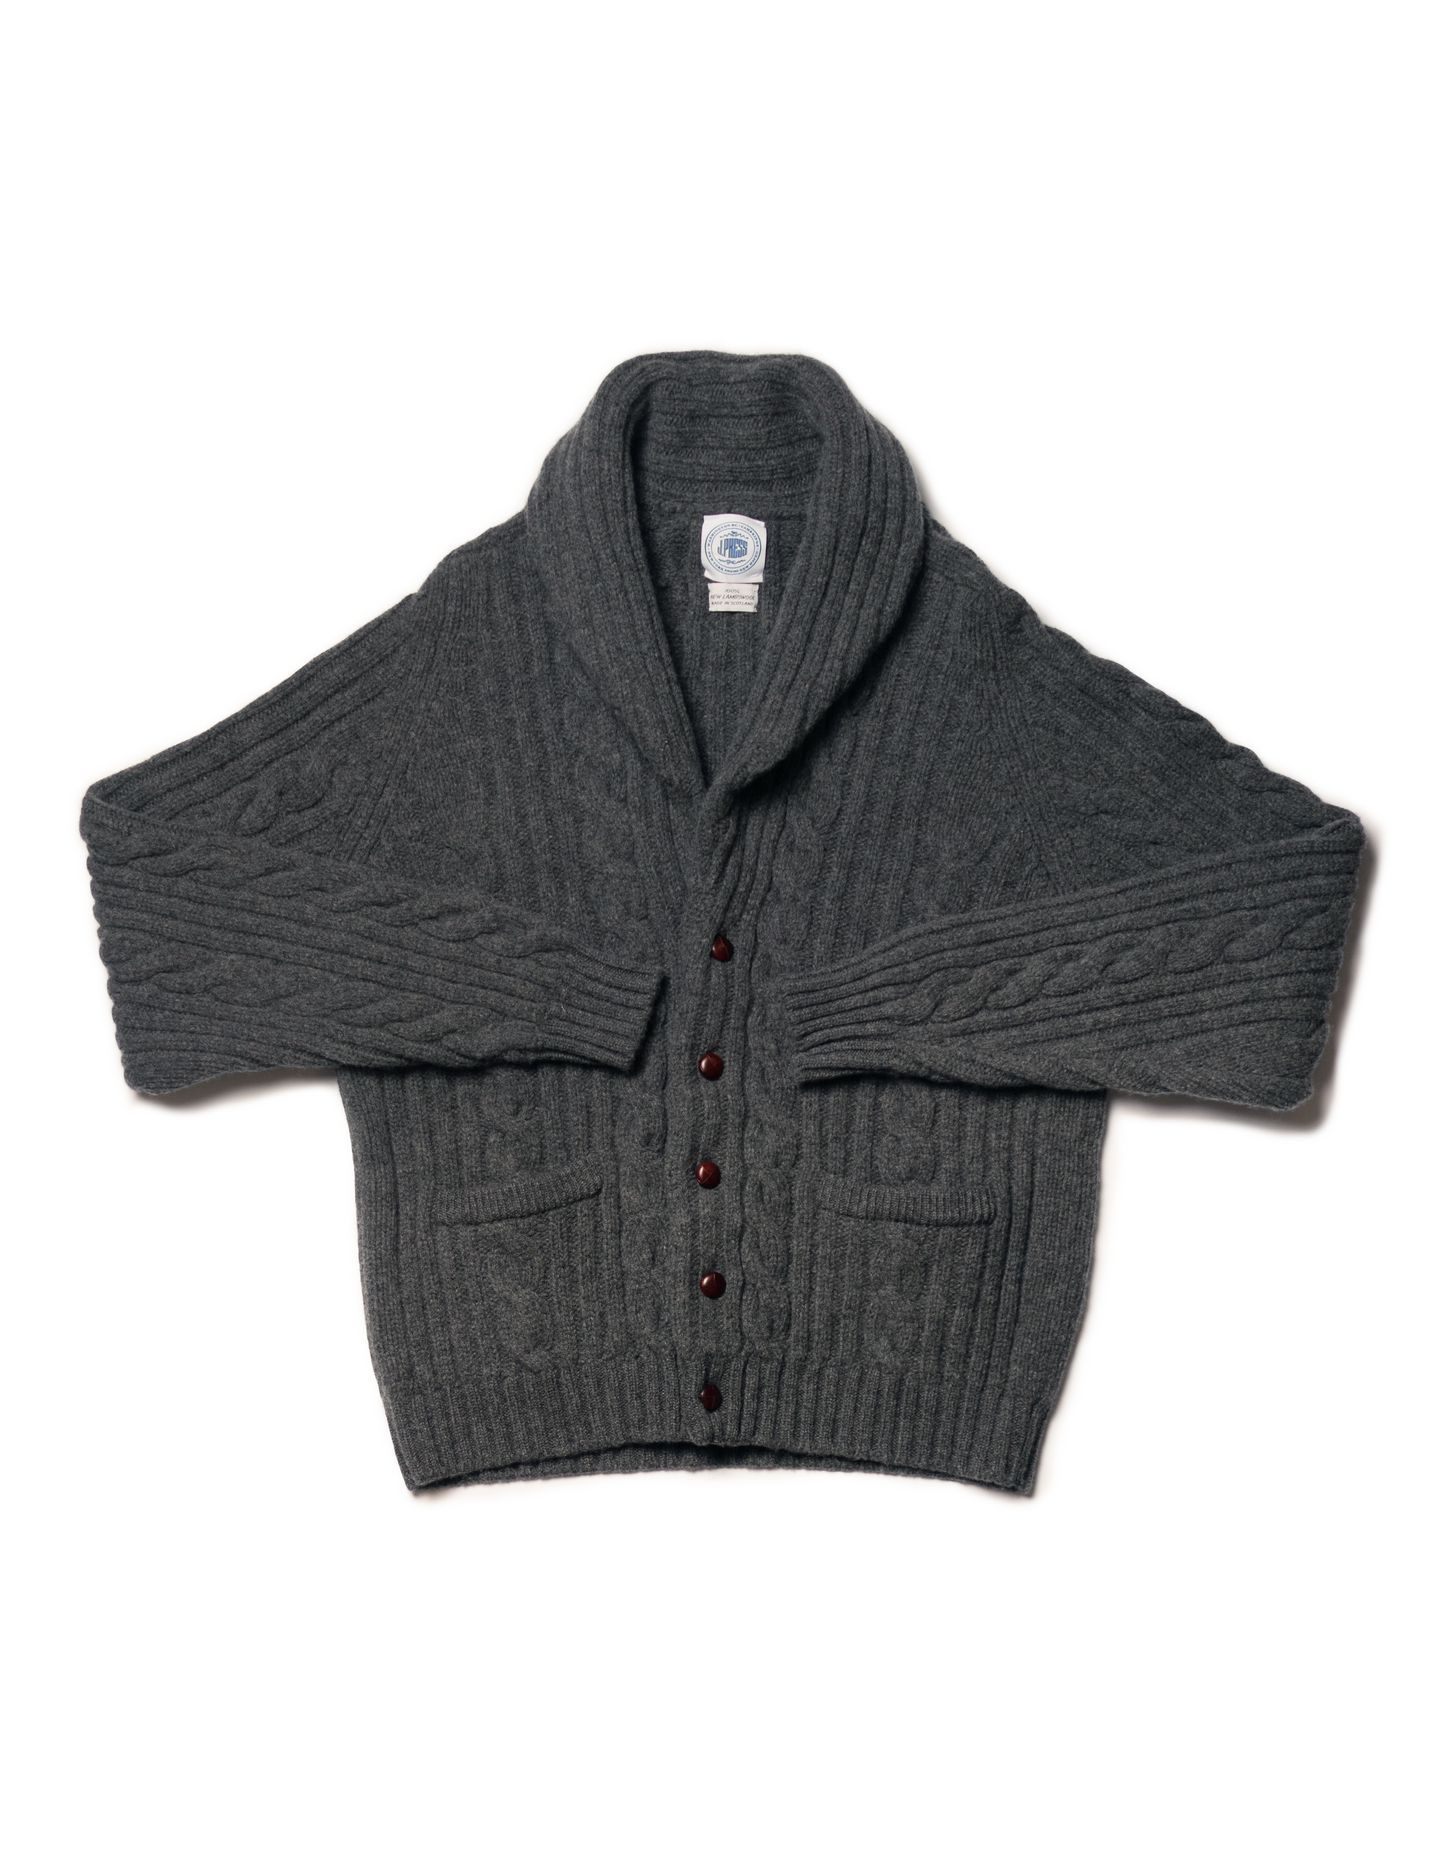 GREY LAMBSWOOL CABLE CARDIGAN